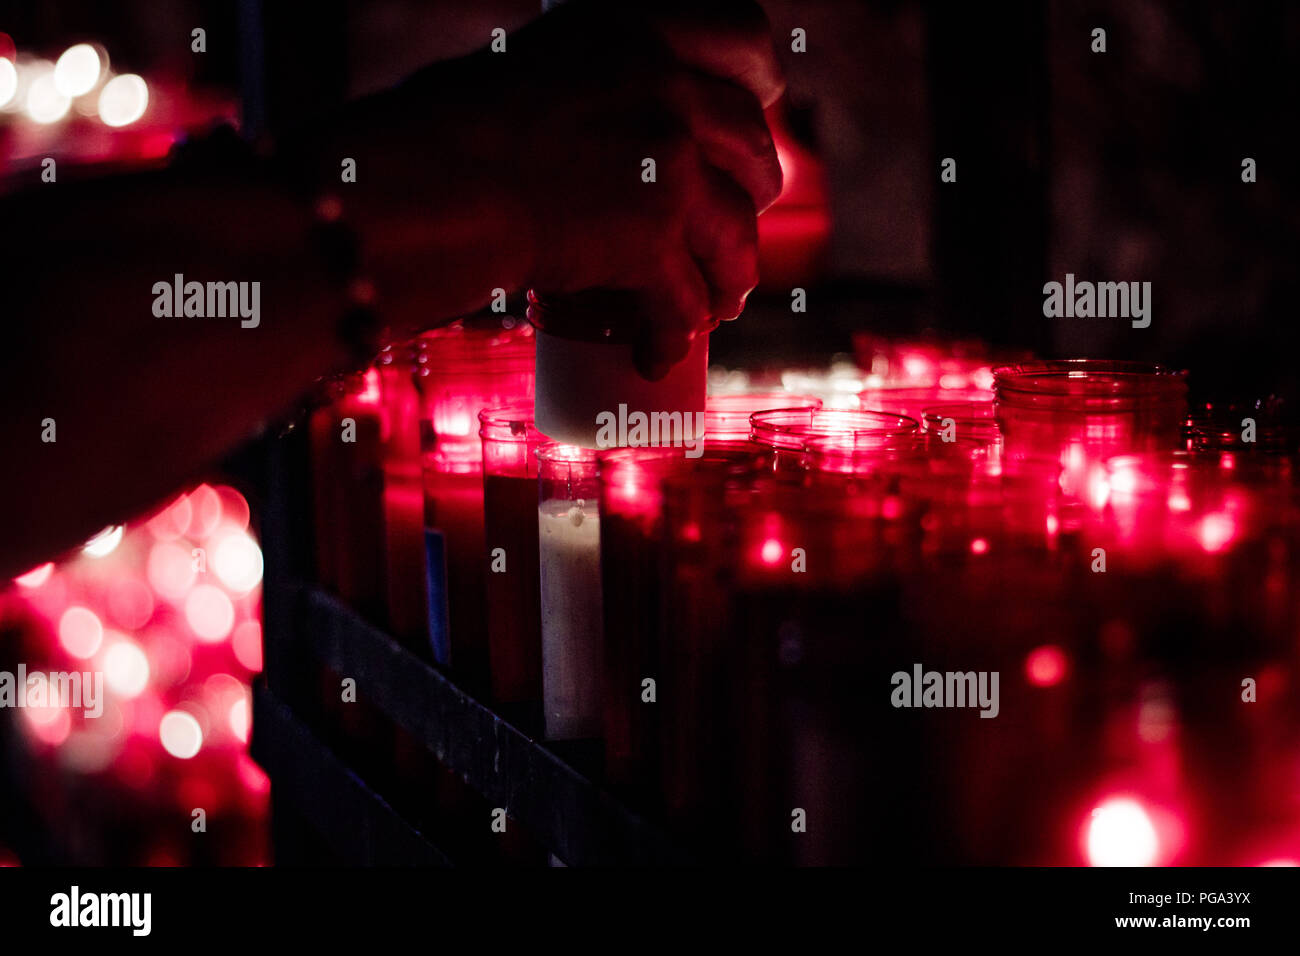 Religious offering, many red candles lit in a religious place Stock Photo